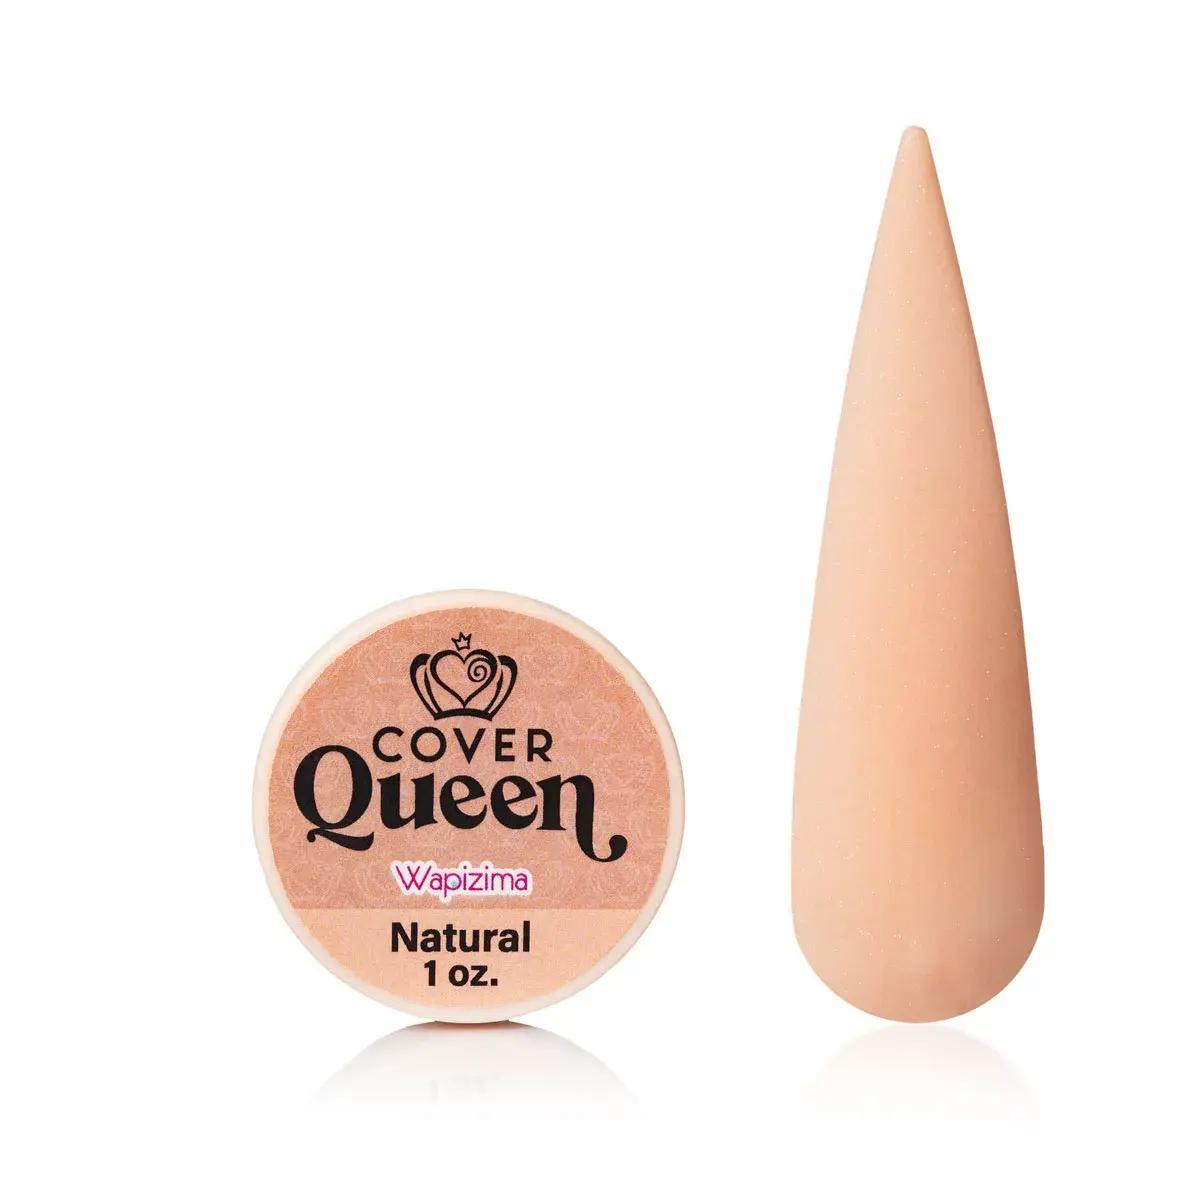 W.Cover Queen Natural 1 oz